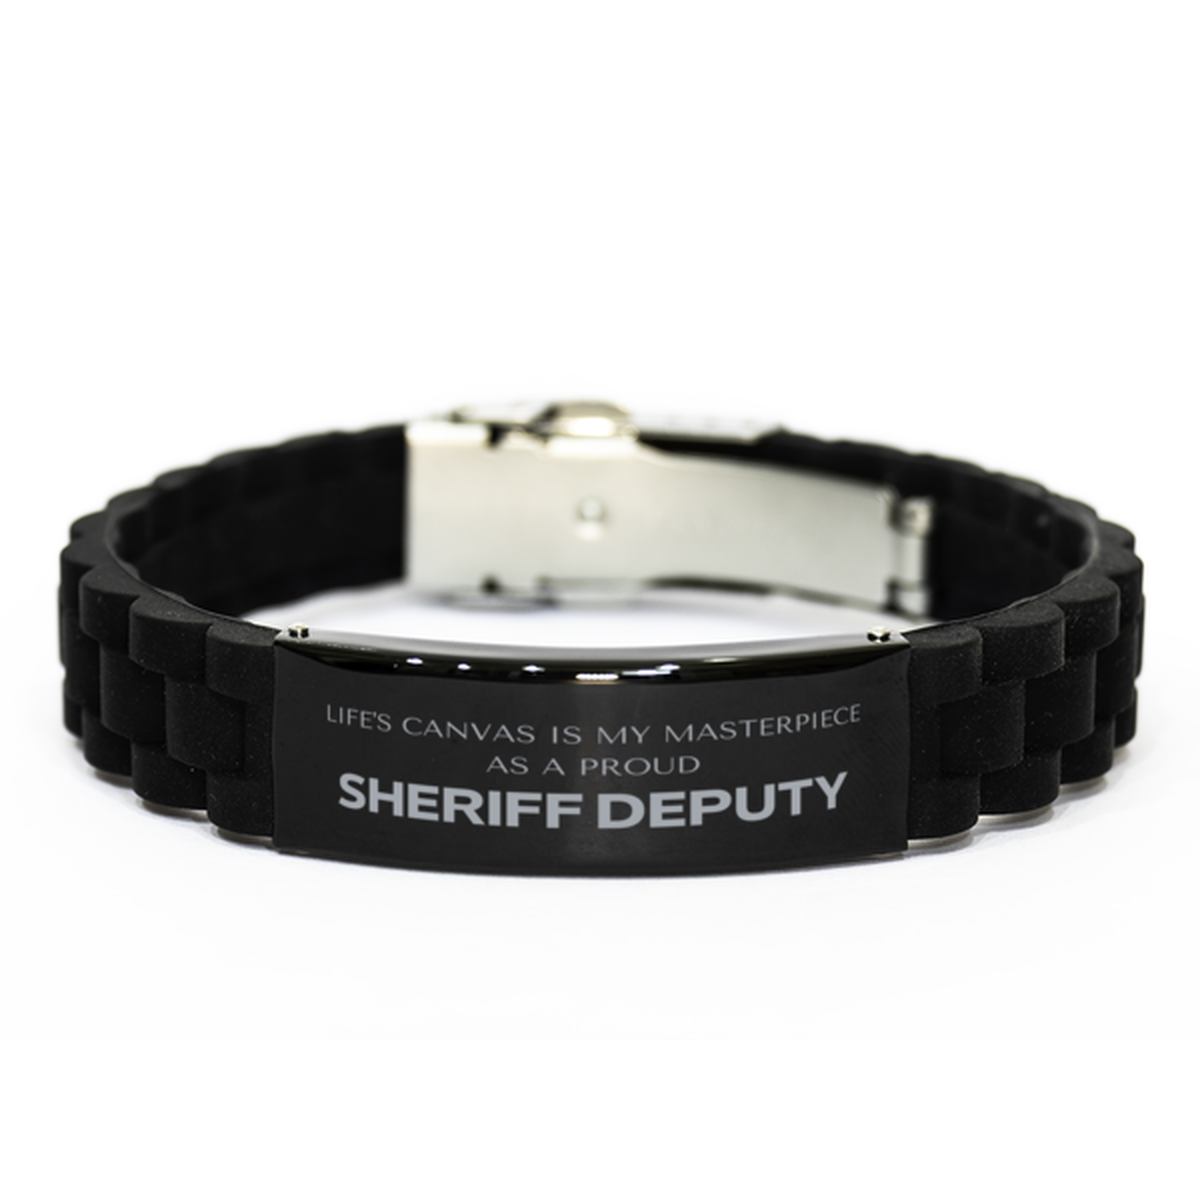 Proud Sheriff Deputy Gifts, Life's canvas is my masterpiece, Epic Birthday Christmas Unique Black Glidelock Clasp Bracelet For Sheriff Deputy, Coworkers, Men, Women, Friends